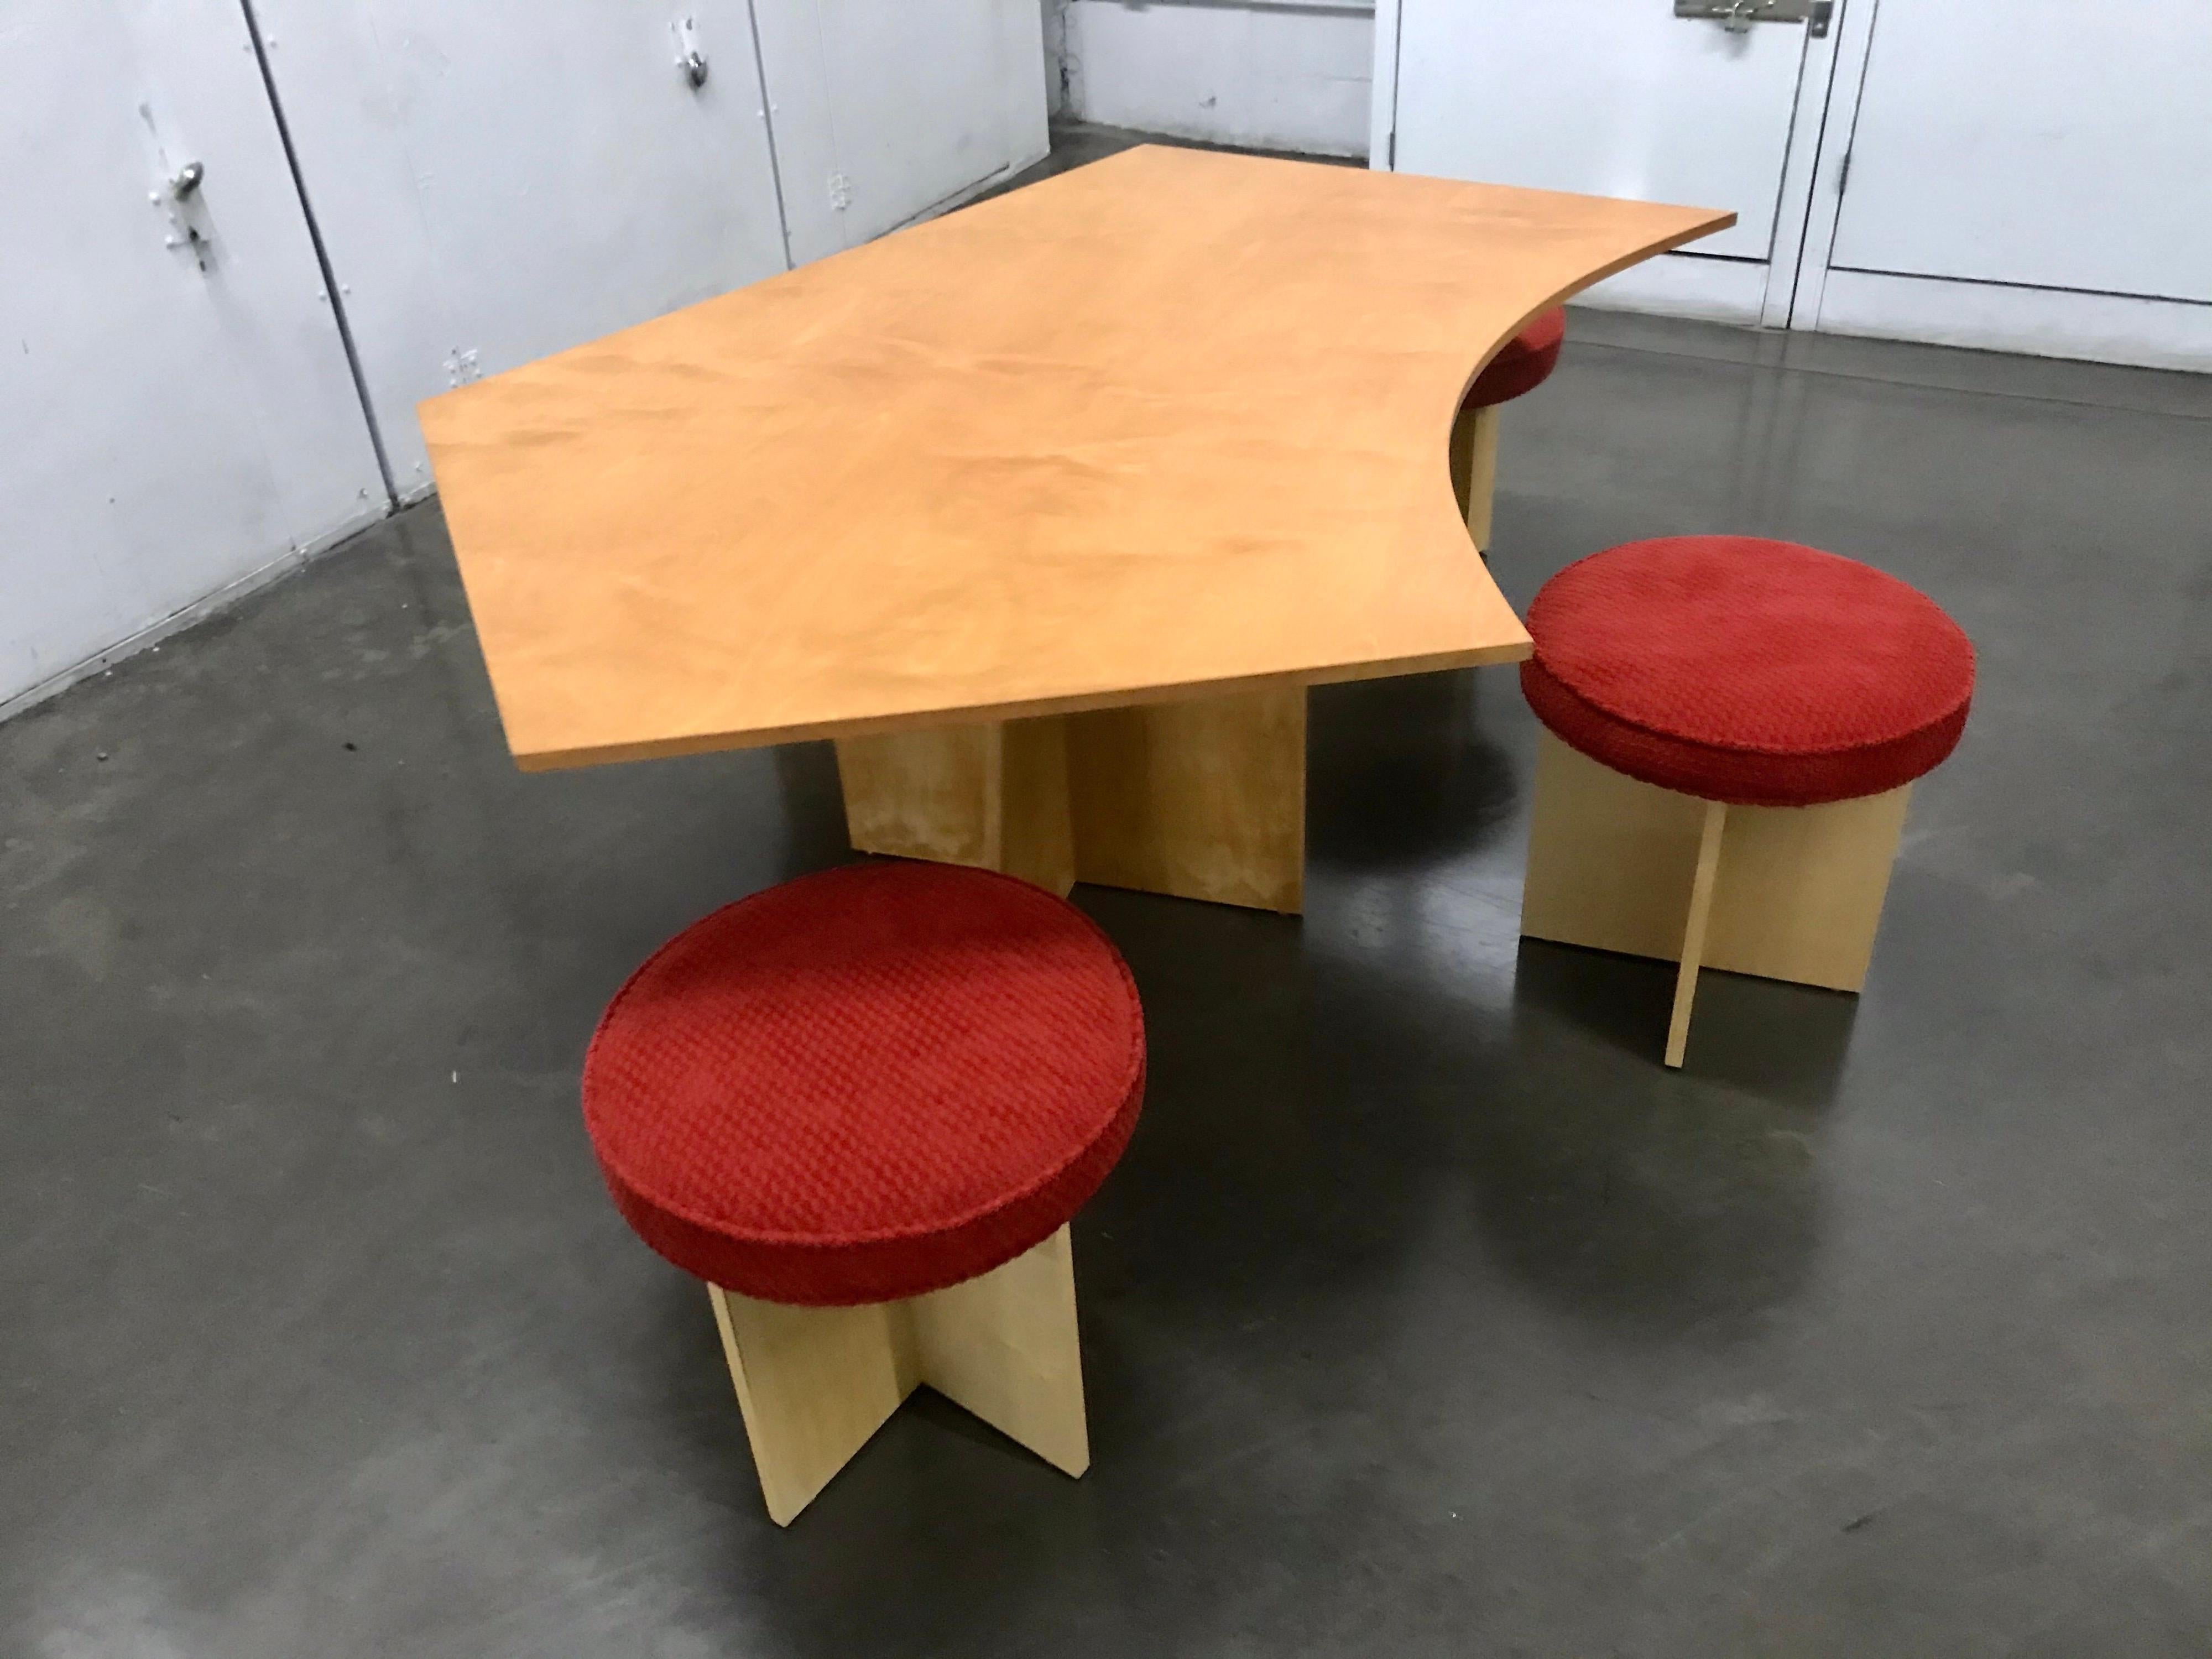 One-off studio set.
Simple modernist design.
Plywood construction with birch veneer.
Asymmetrical top with X base stools 18